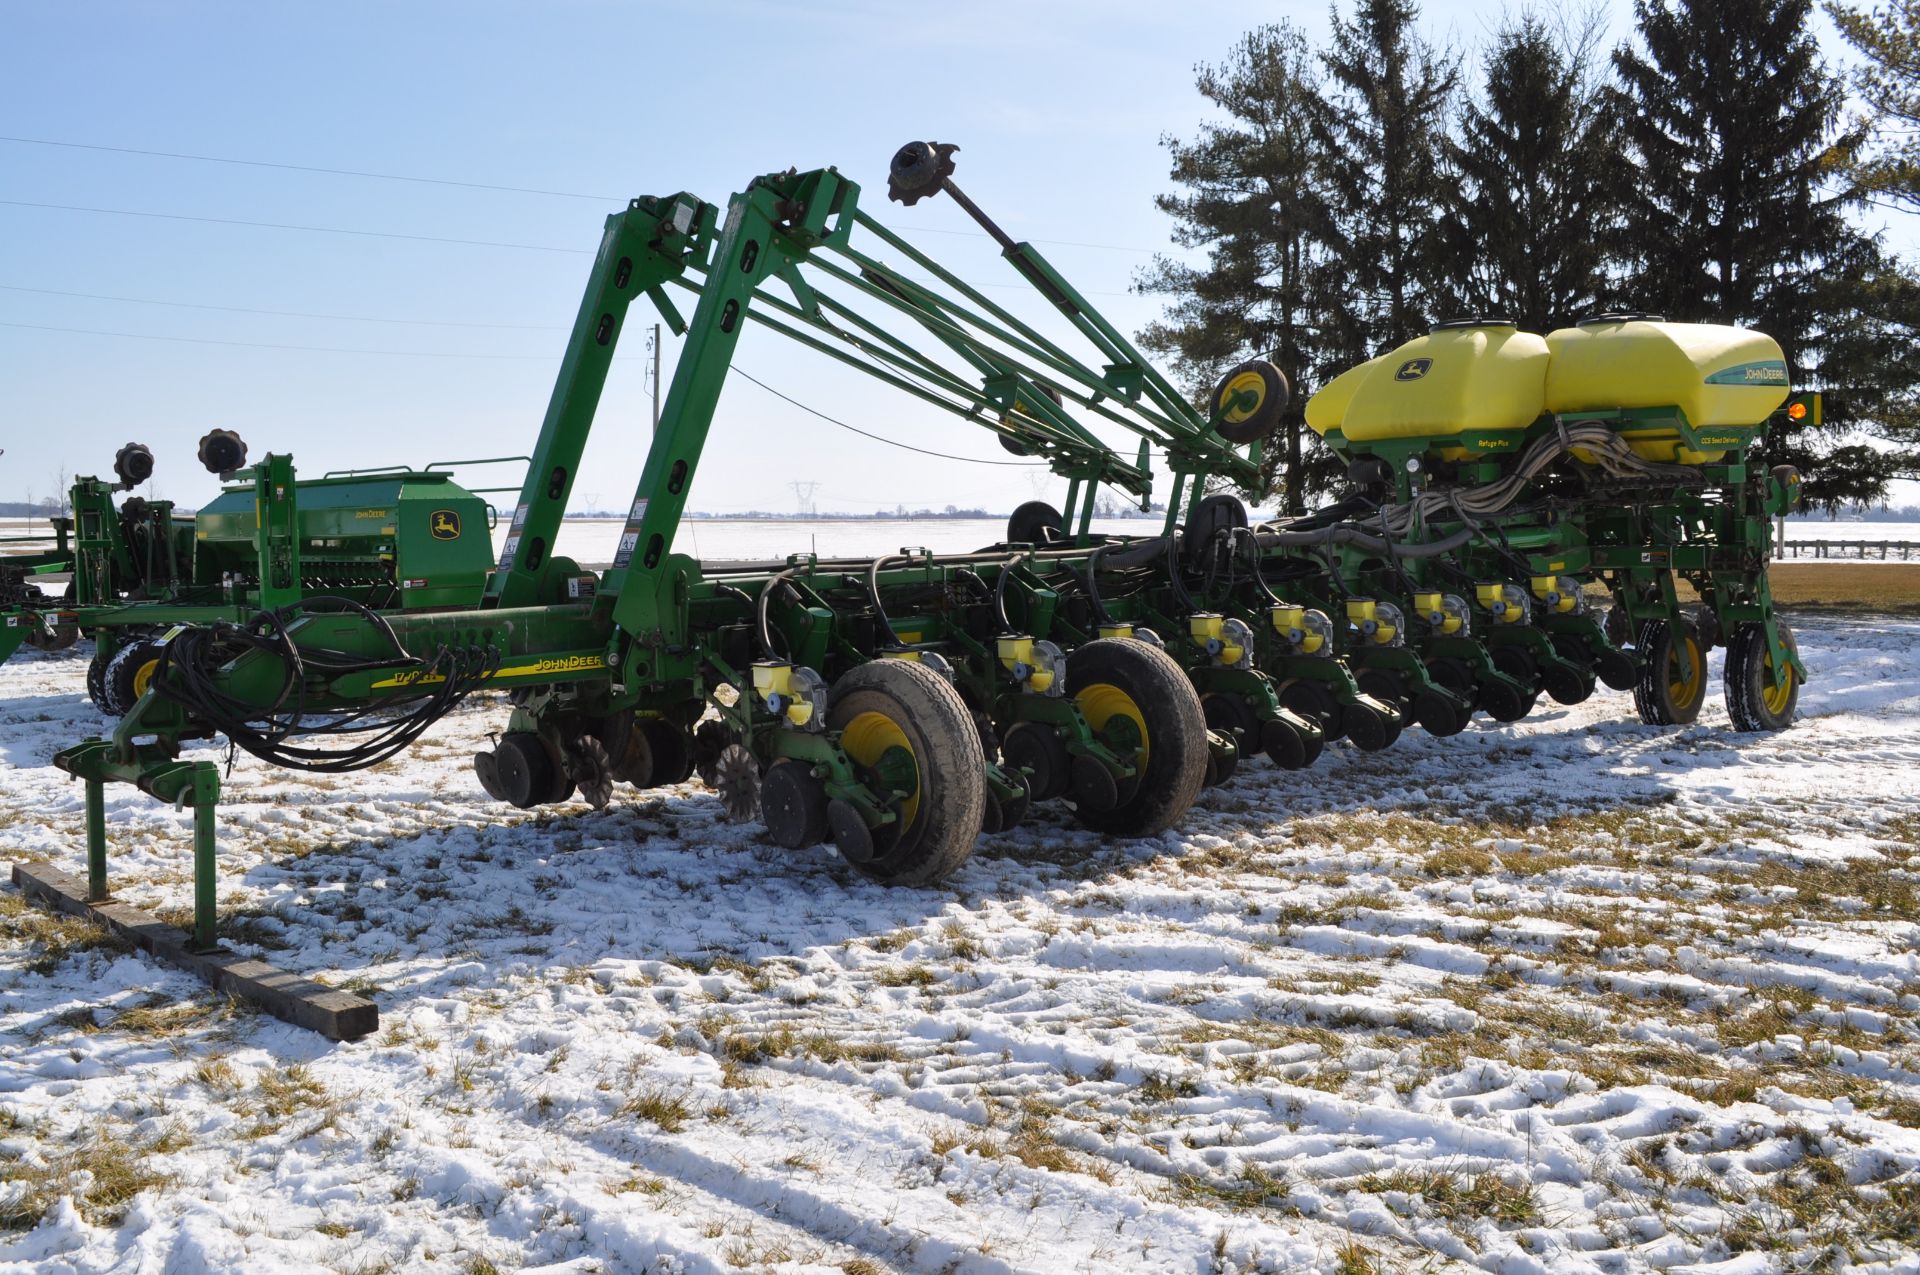 John Deere 1770 NT 24 row 30” planter, front fold, CCS, Refuge Plus tank, markers, no-till coulters,